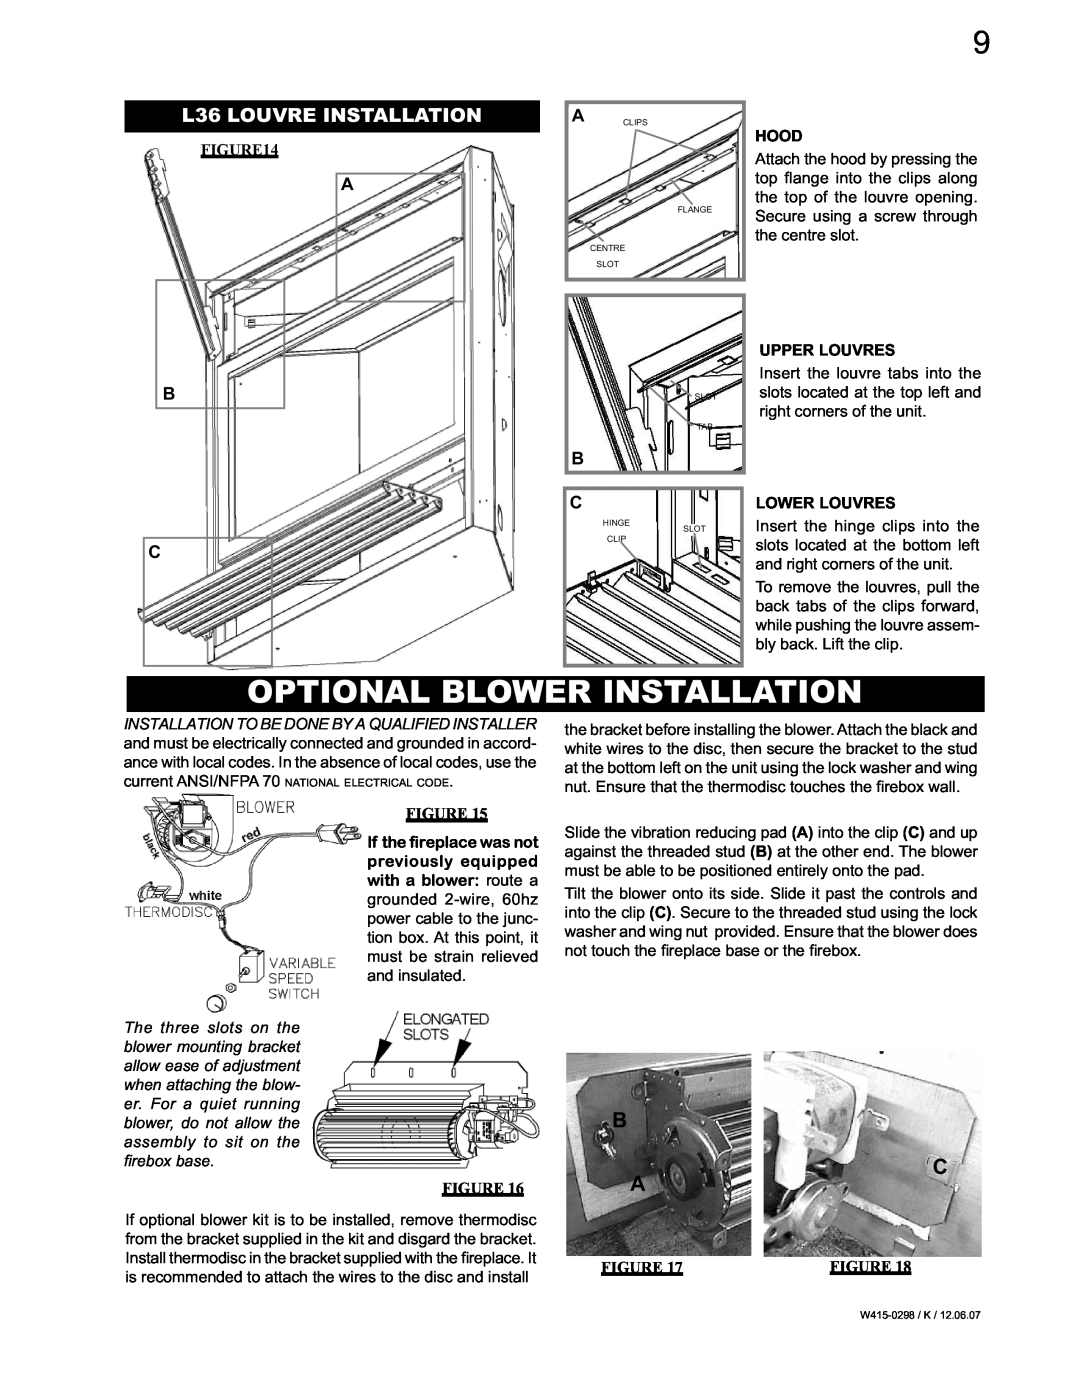 Continental CVF36P manual Optional Blower Installation, B C A, L36 LOUVRE INSTALLATION, Hood, Upper Louvres, Lower Louvres 